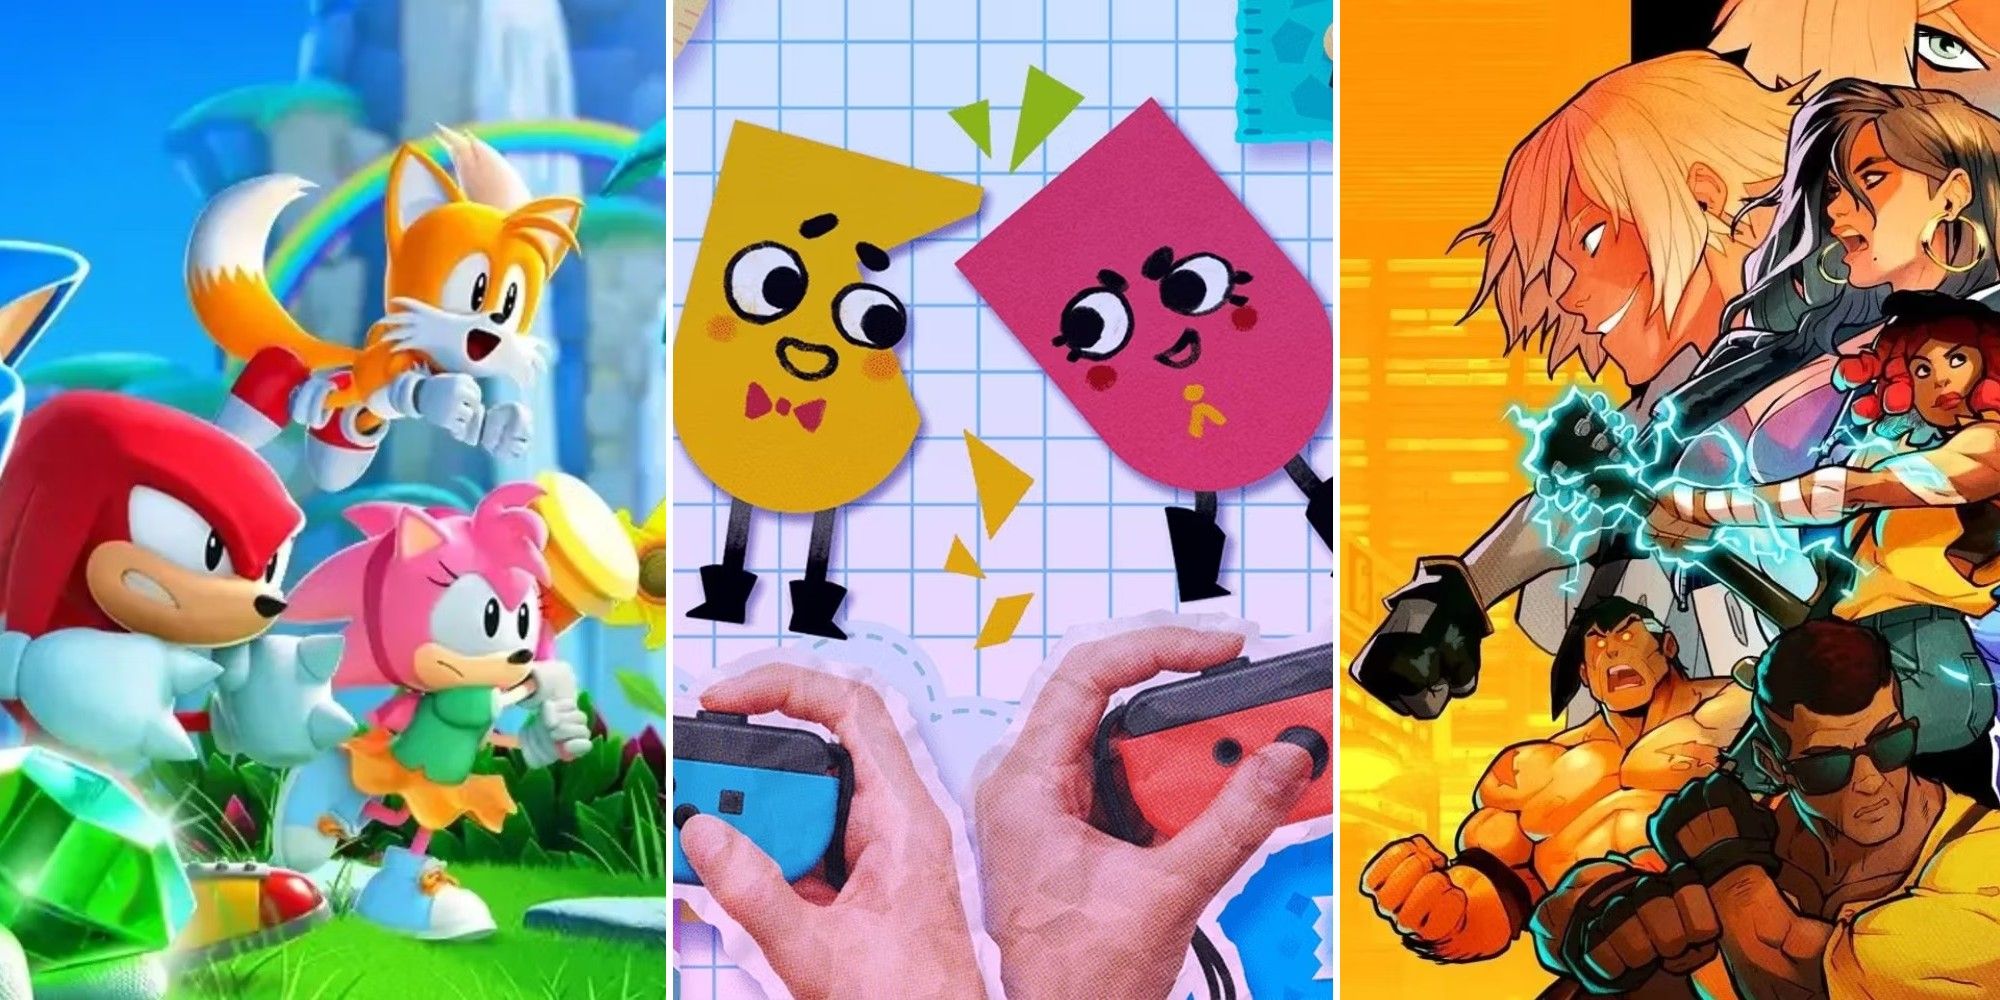 Collage showing cover art for Sonic Superstars, Snipperclips and Streets of Rage 4